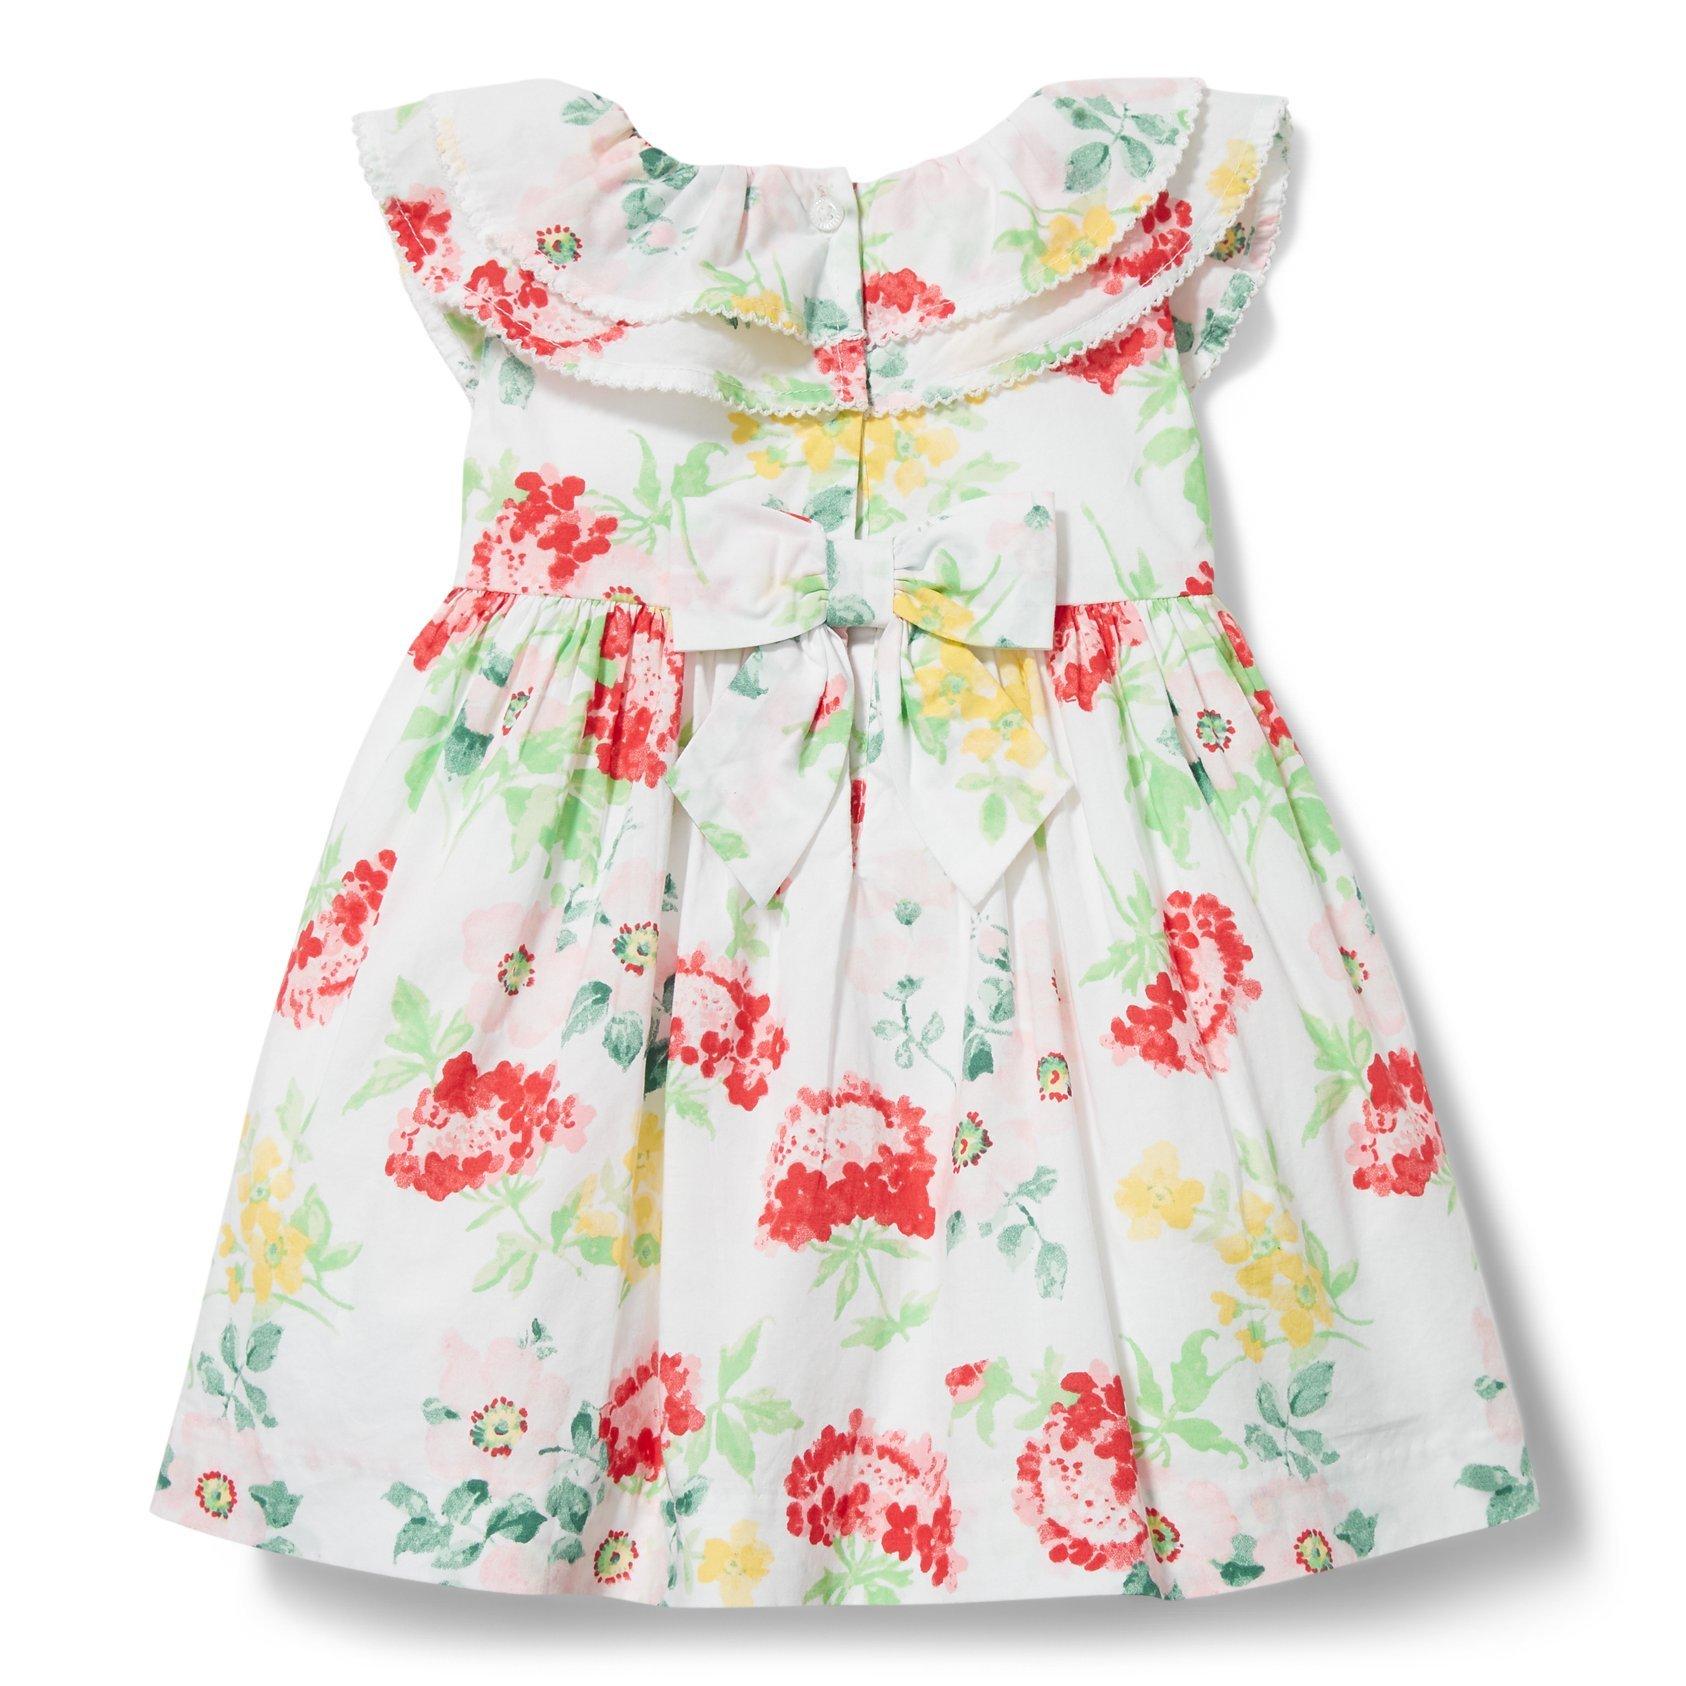 Newborn White Floral Baby Floral Dress by Janie and Jack